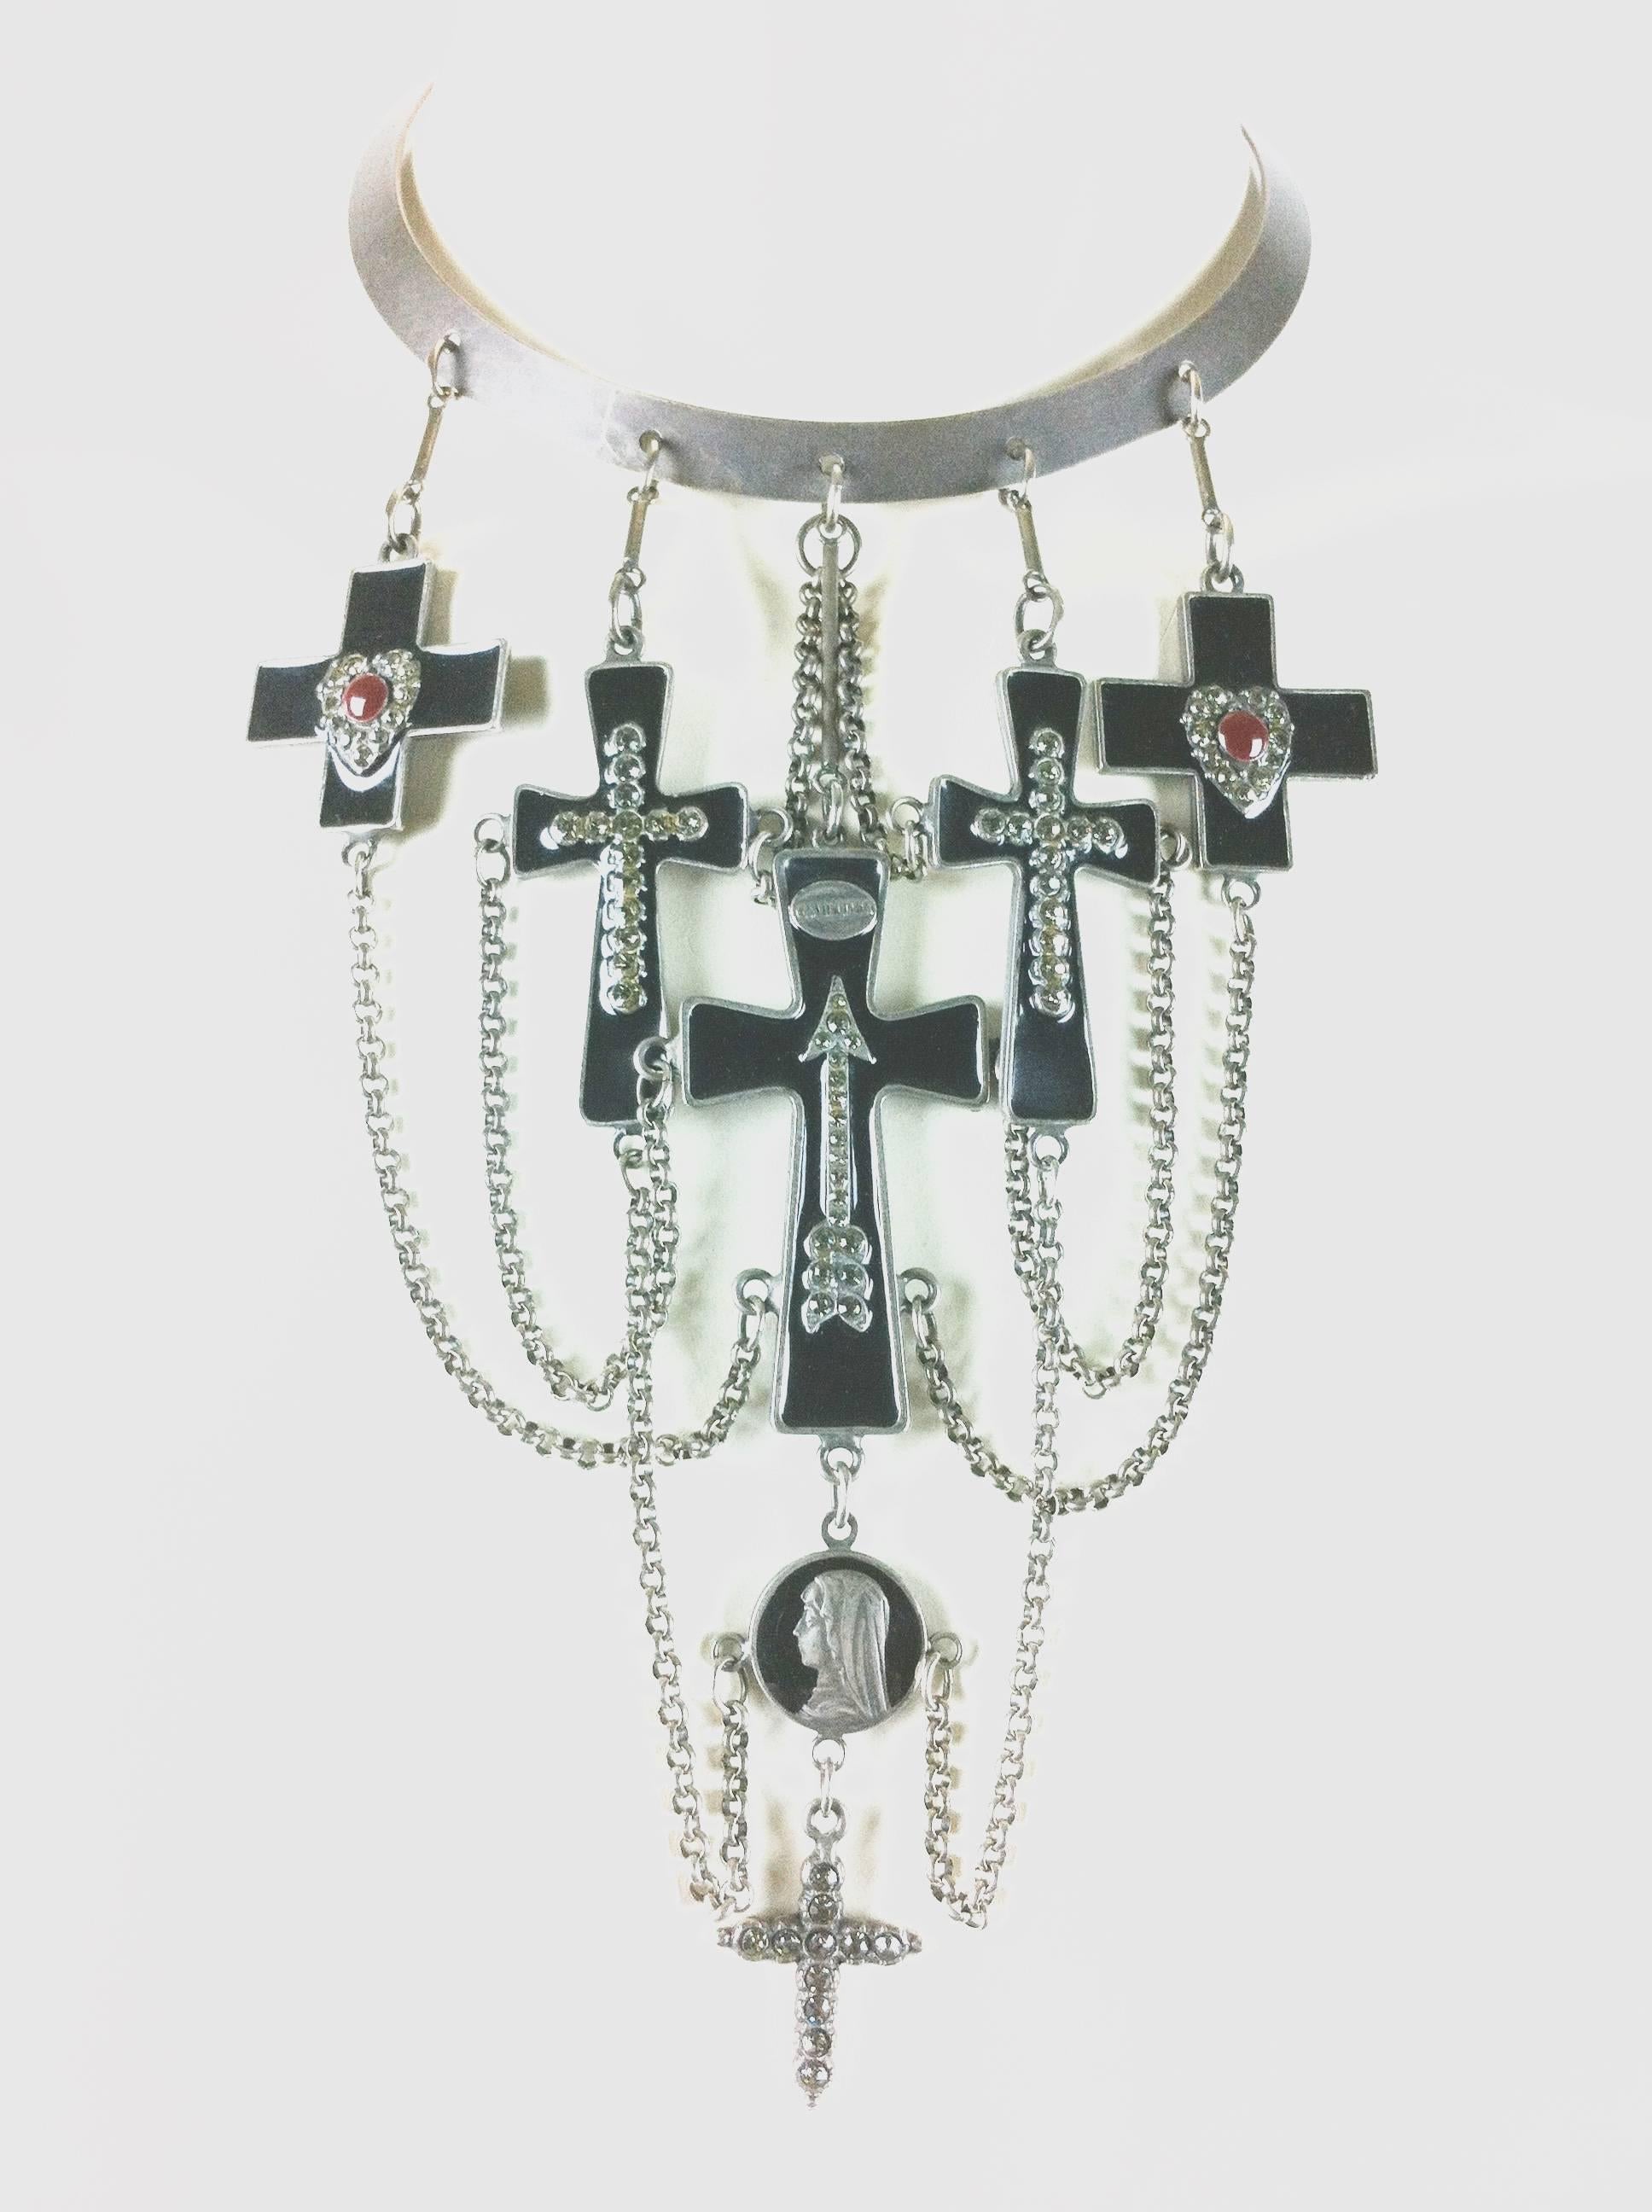 Jean Paul Gaultier 2007 'Sacred Heart' Collection
Metal collar with Enameled and Stone Set Crosses and Sacred Hearts 